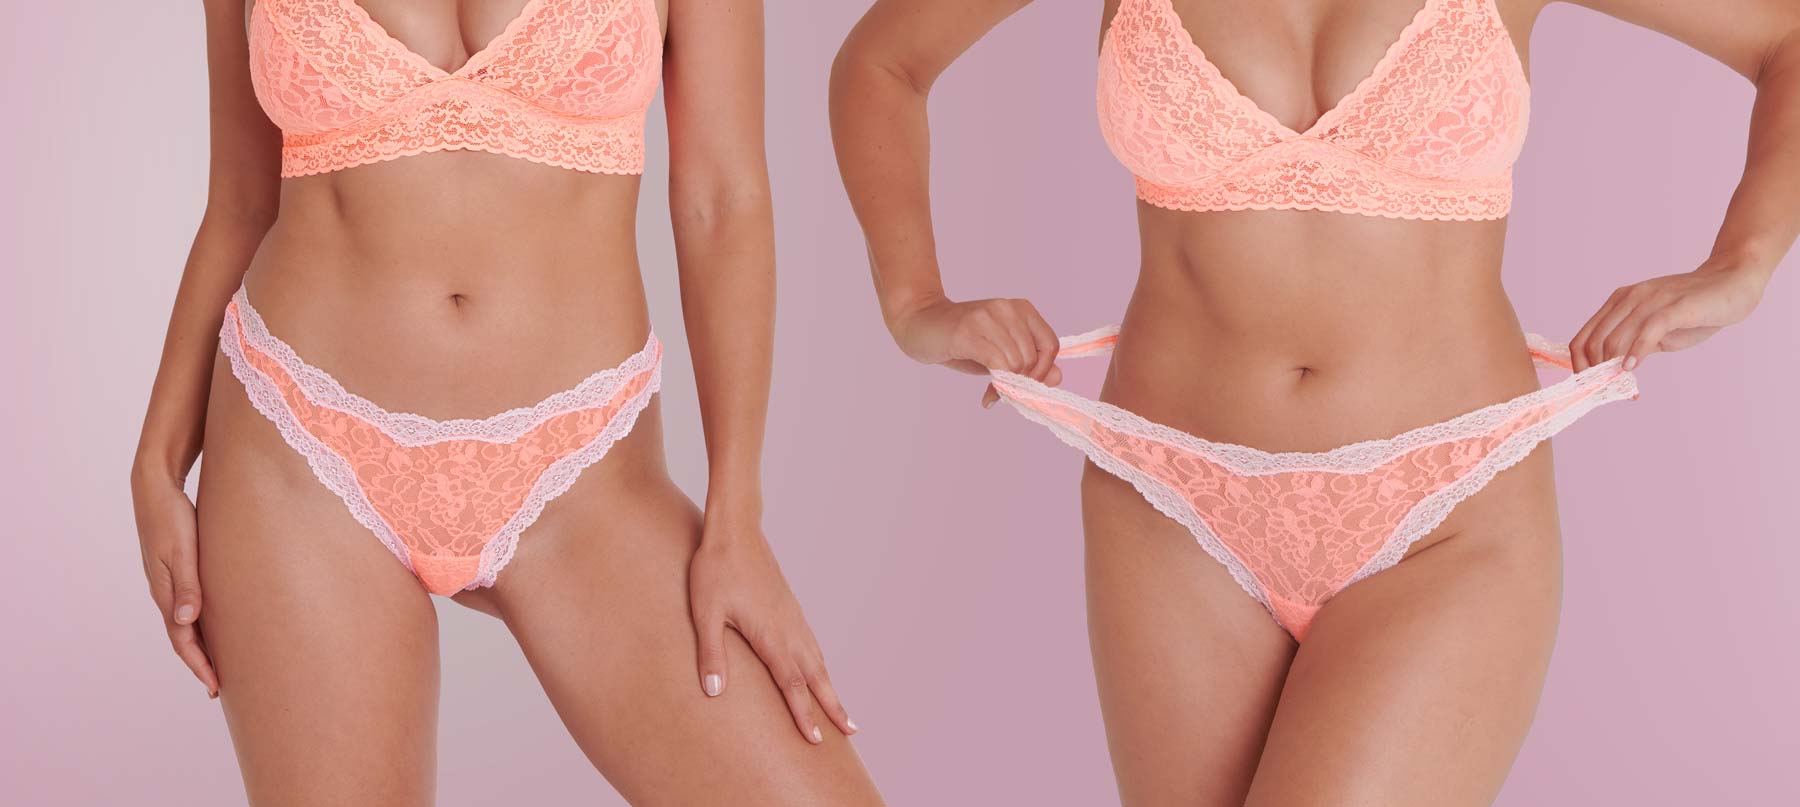 Why You Should Never Buy Cheap Lingerie